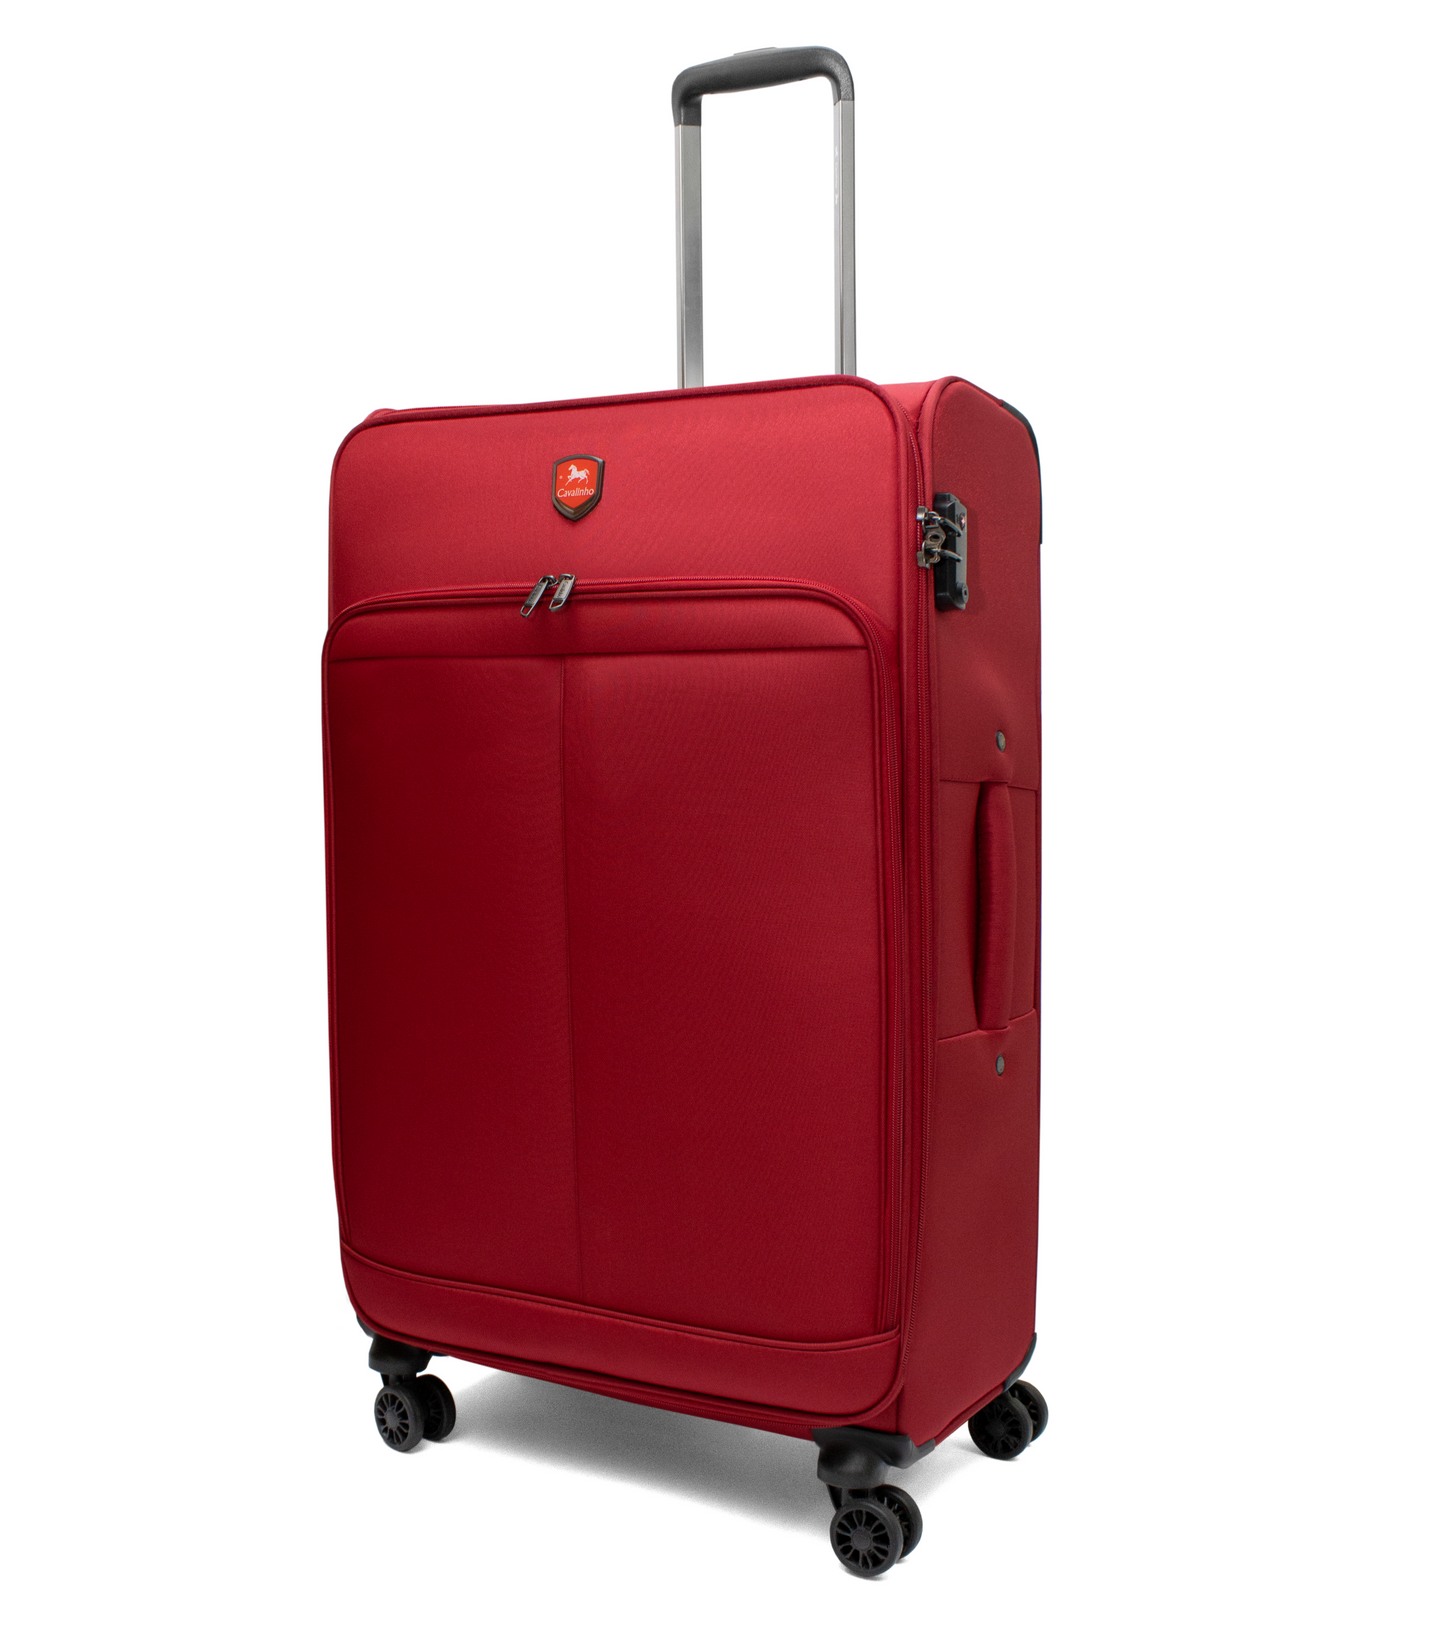 Cavalinho Check-in Softside Luggage (24" or 28") - 28 inch Red - 68020003.04.28_2